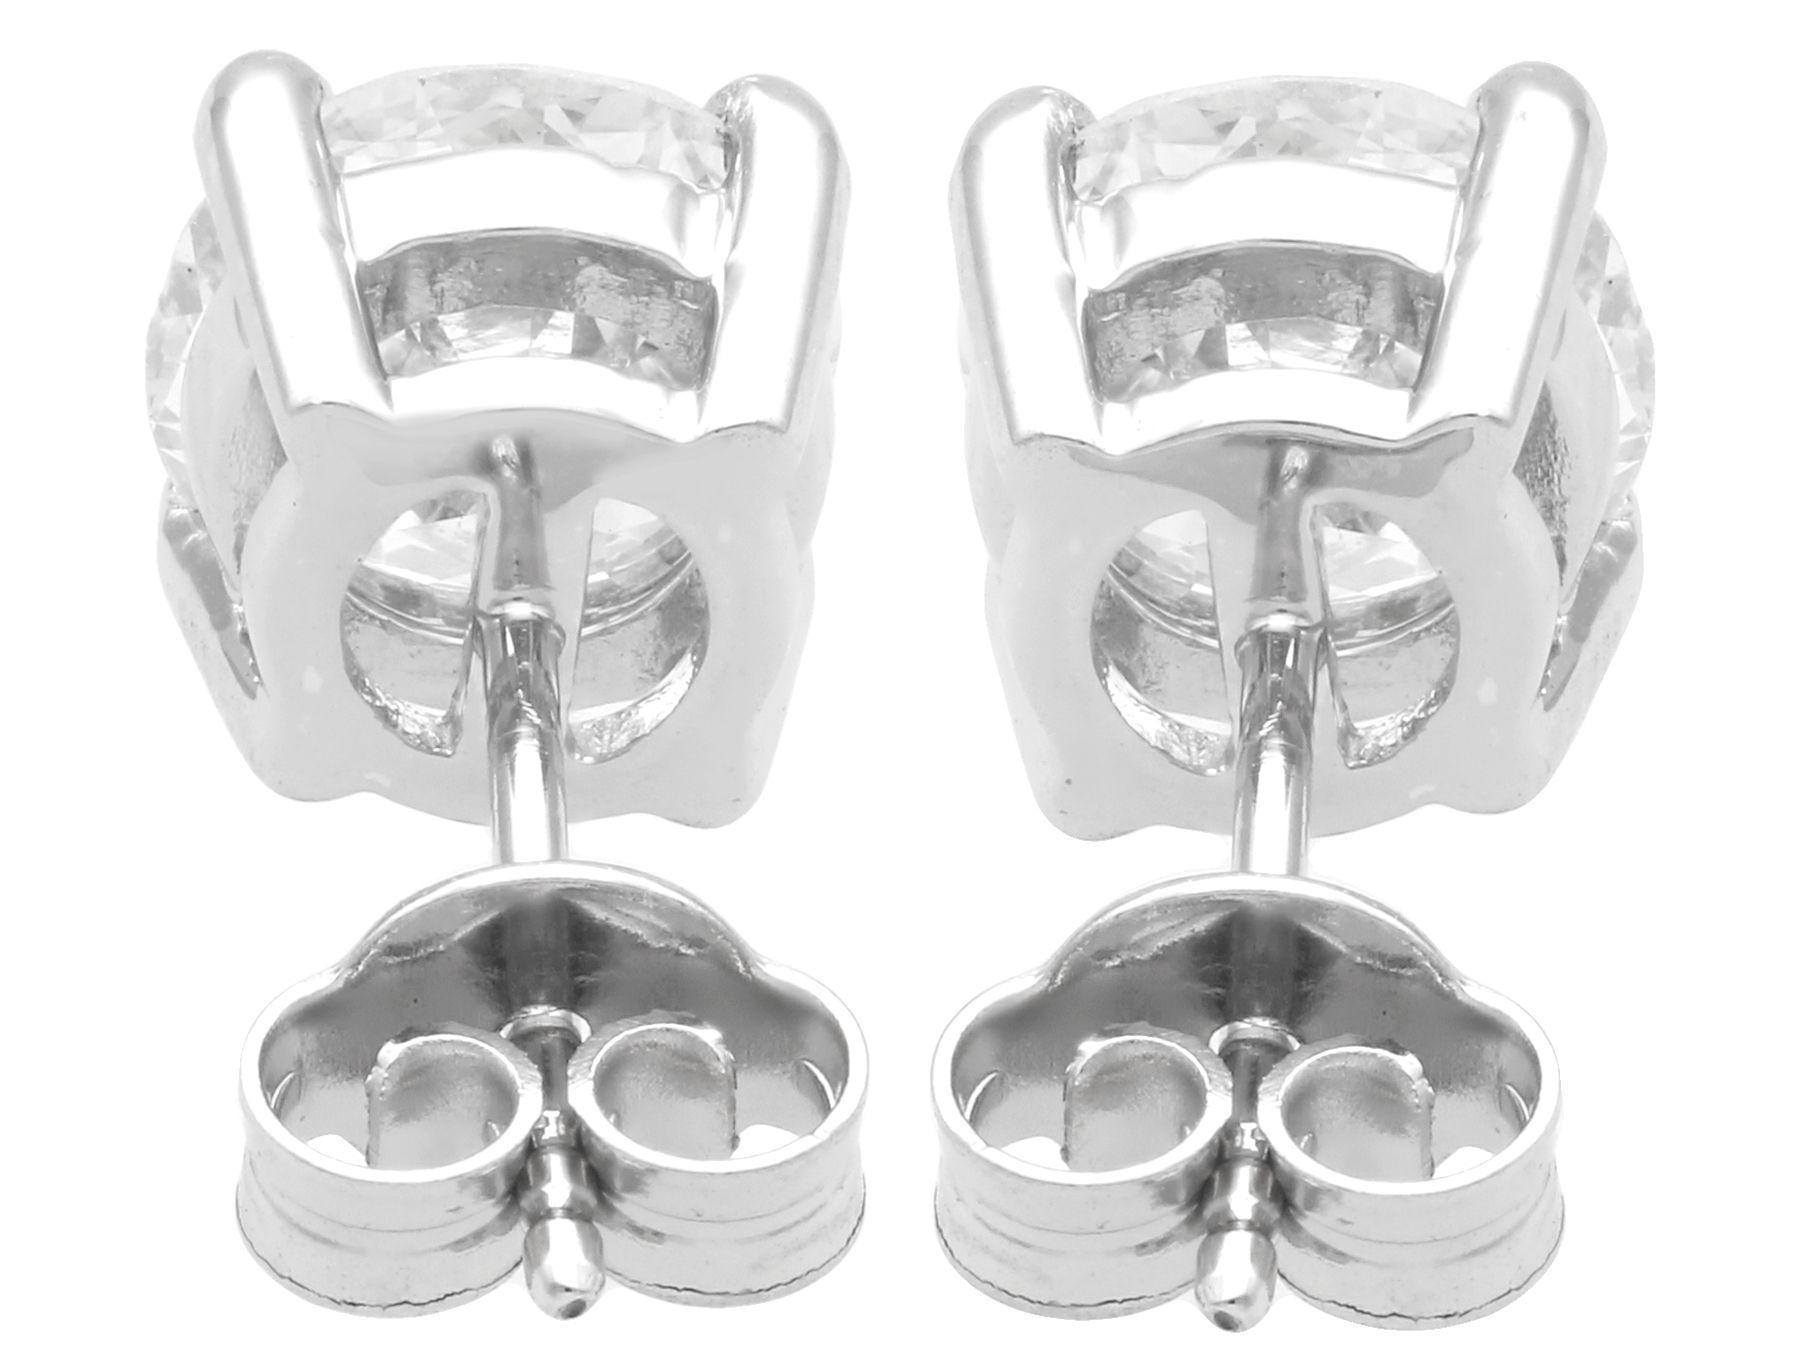 A stunning, fine and impressive pair of antique 2.91 Carat diamond and contemporary 18 karat white gold stud earrings; part of our diverse vintage jewelry and estate jewelry collections.

These stunning, fine and impressive antique earrings with